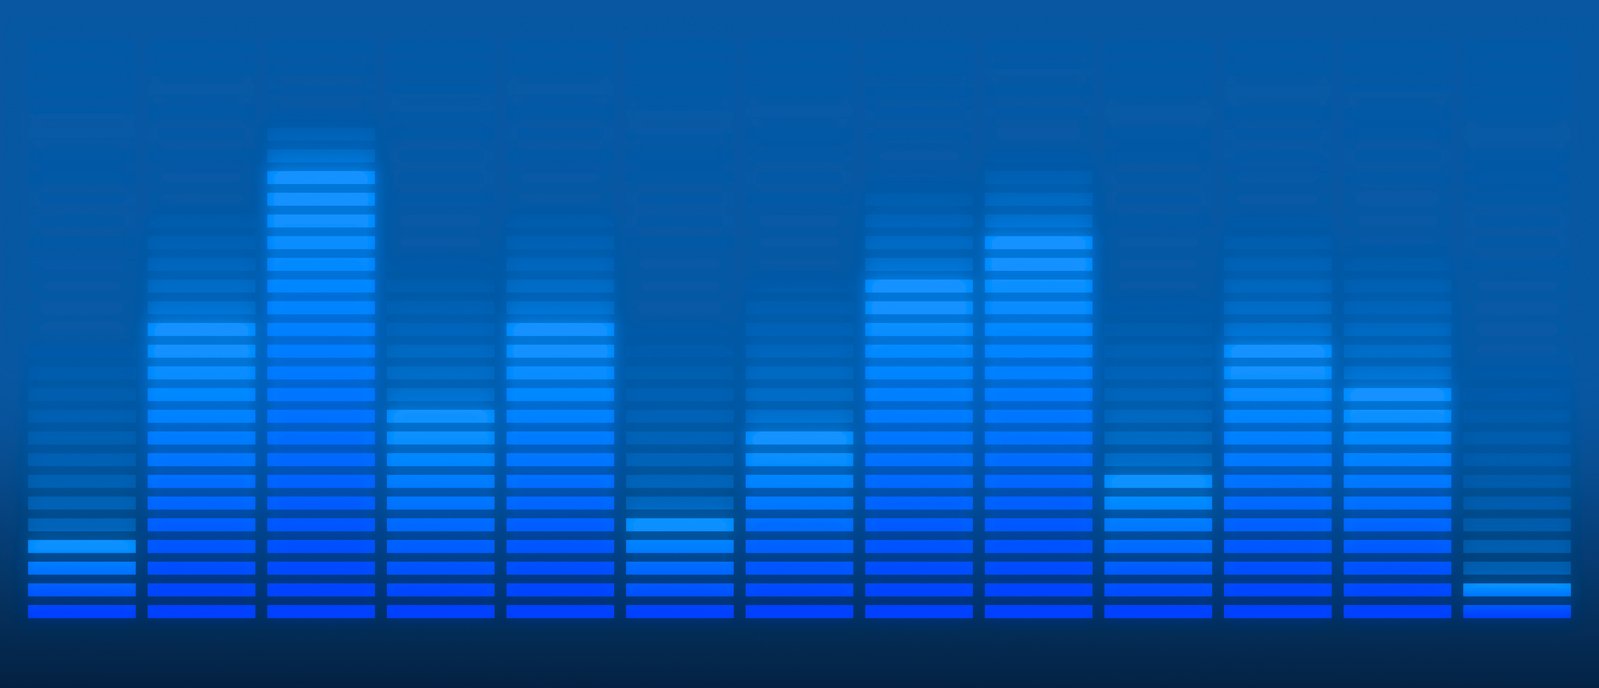 a dark and blue background with equalizing lines